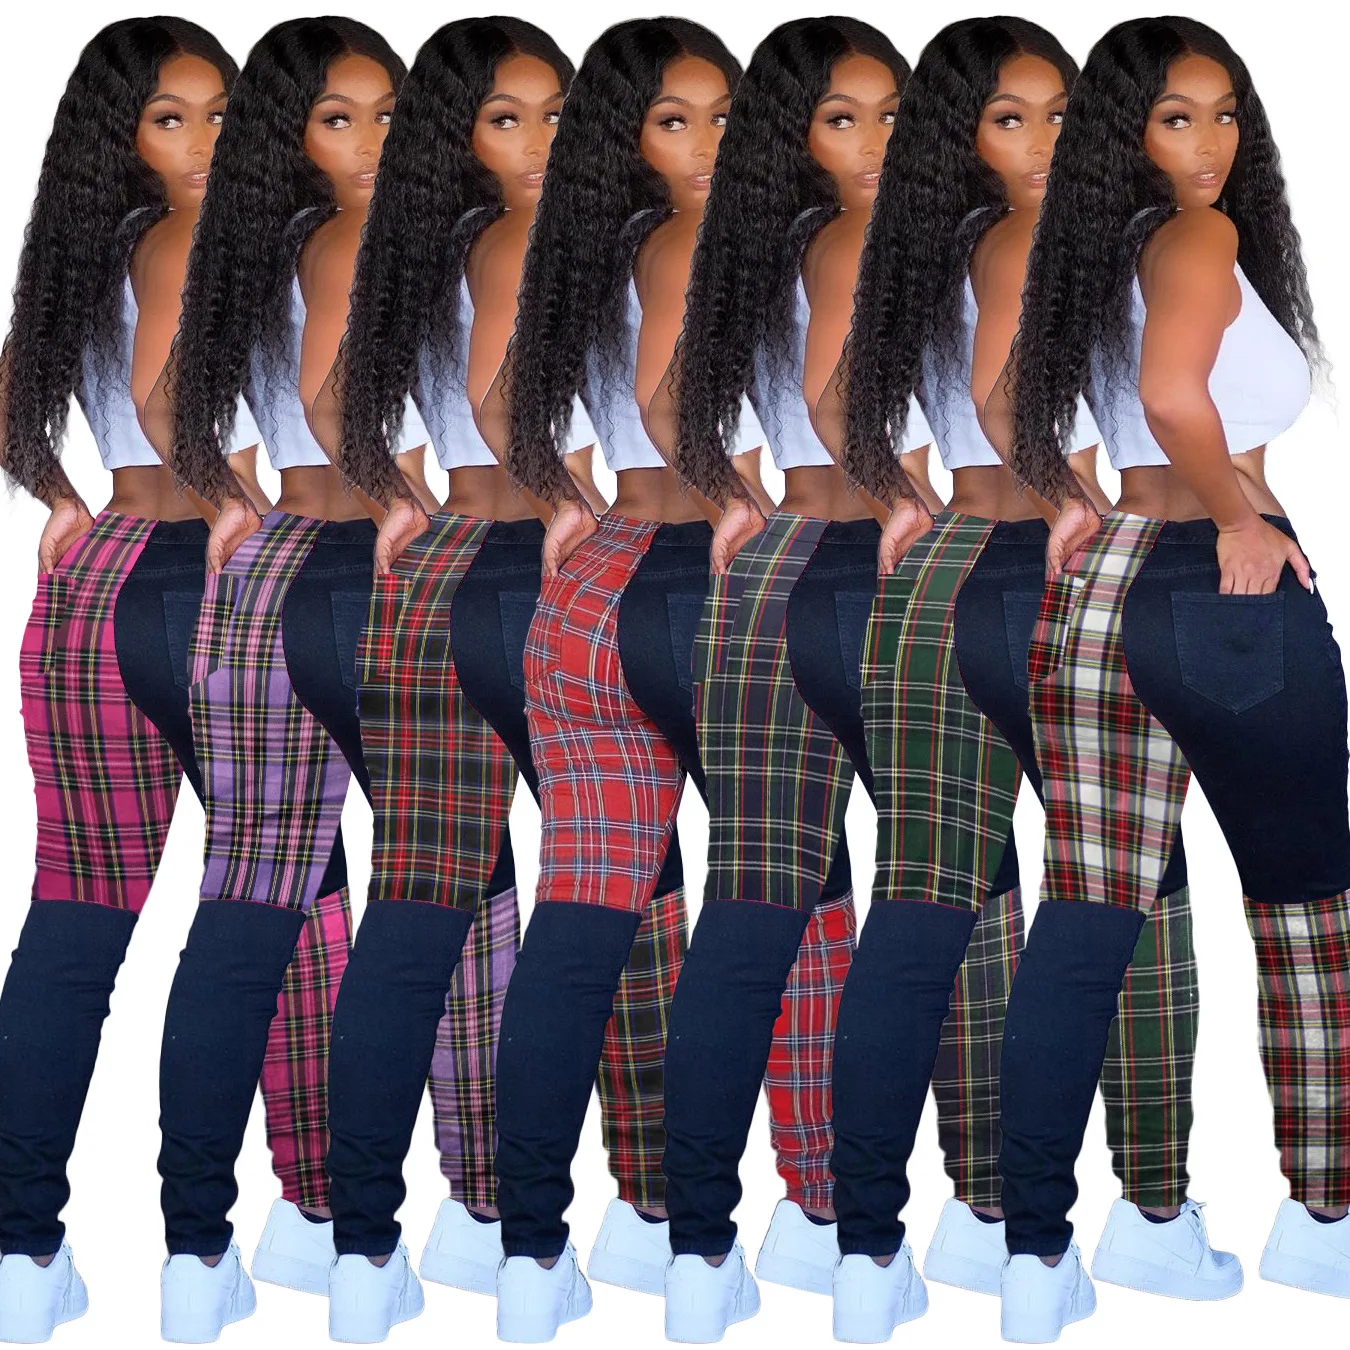 DIDK Women's High Waist Colorblock Tartan Chain Belted Jogger Pants with  Pockets Purple Camel XS at Amazon Women's Clothing store